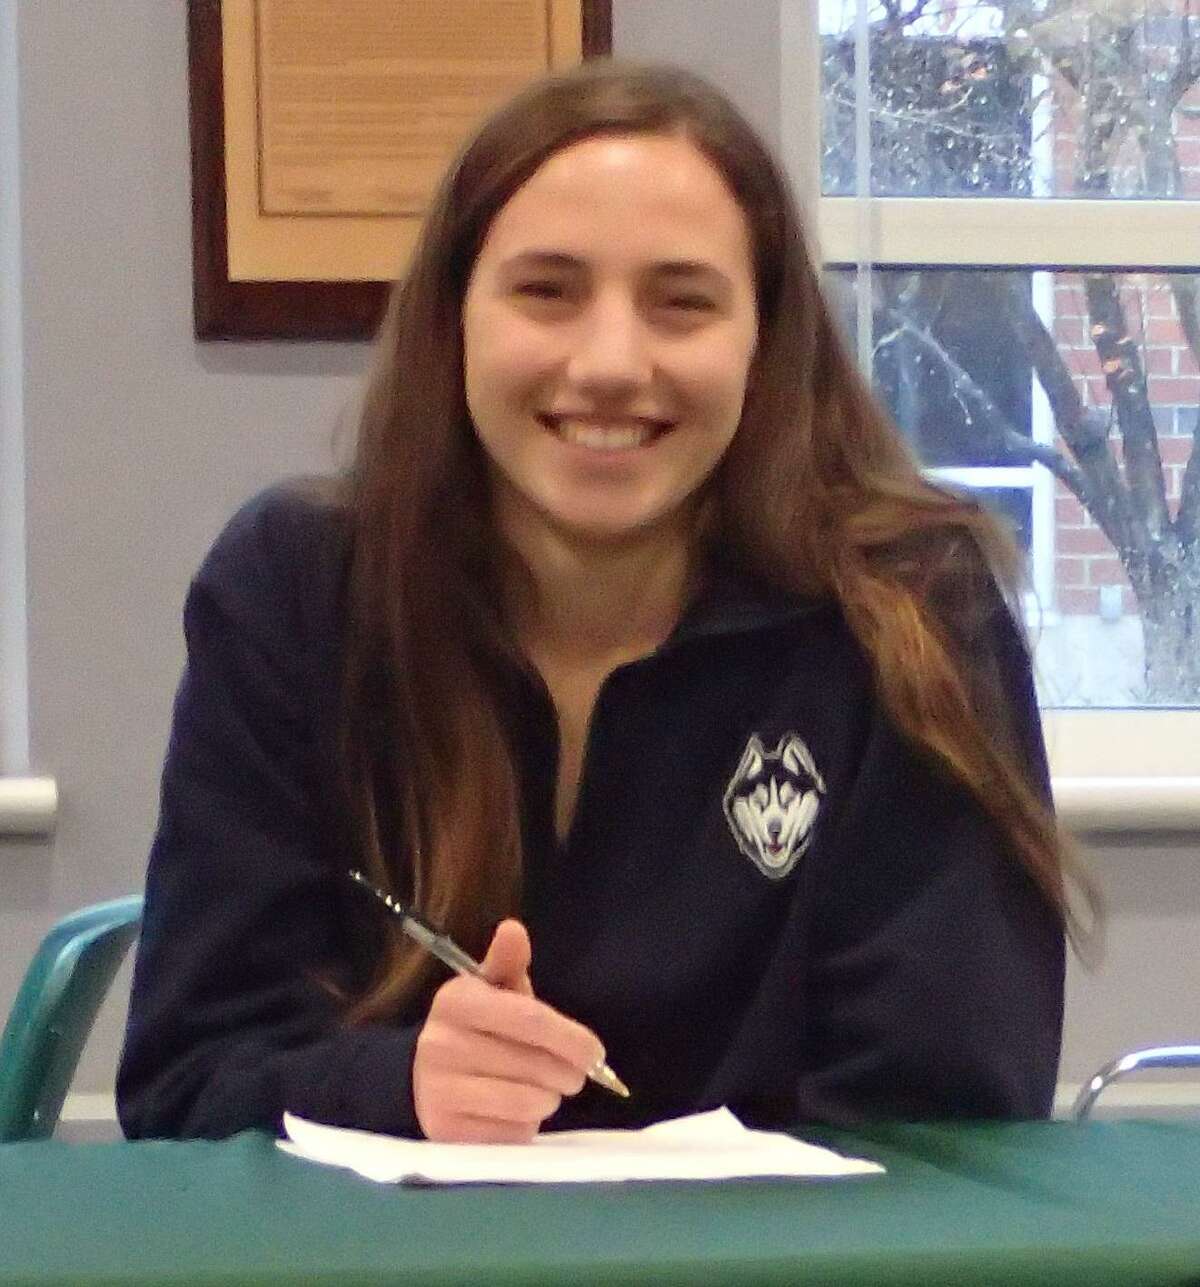 New Milford High School senior Mia Nahom signs her National Letter of Intent to compete for the cross country and track and field teams at UConn during a ceremony in the high school's library Nov. 15, 2016.